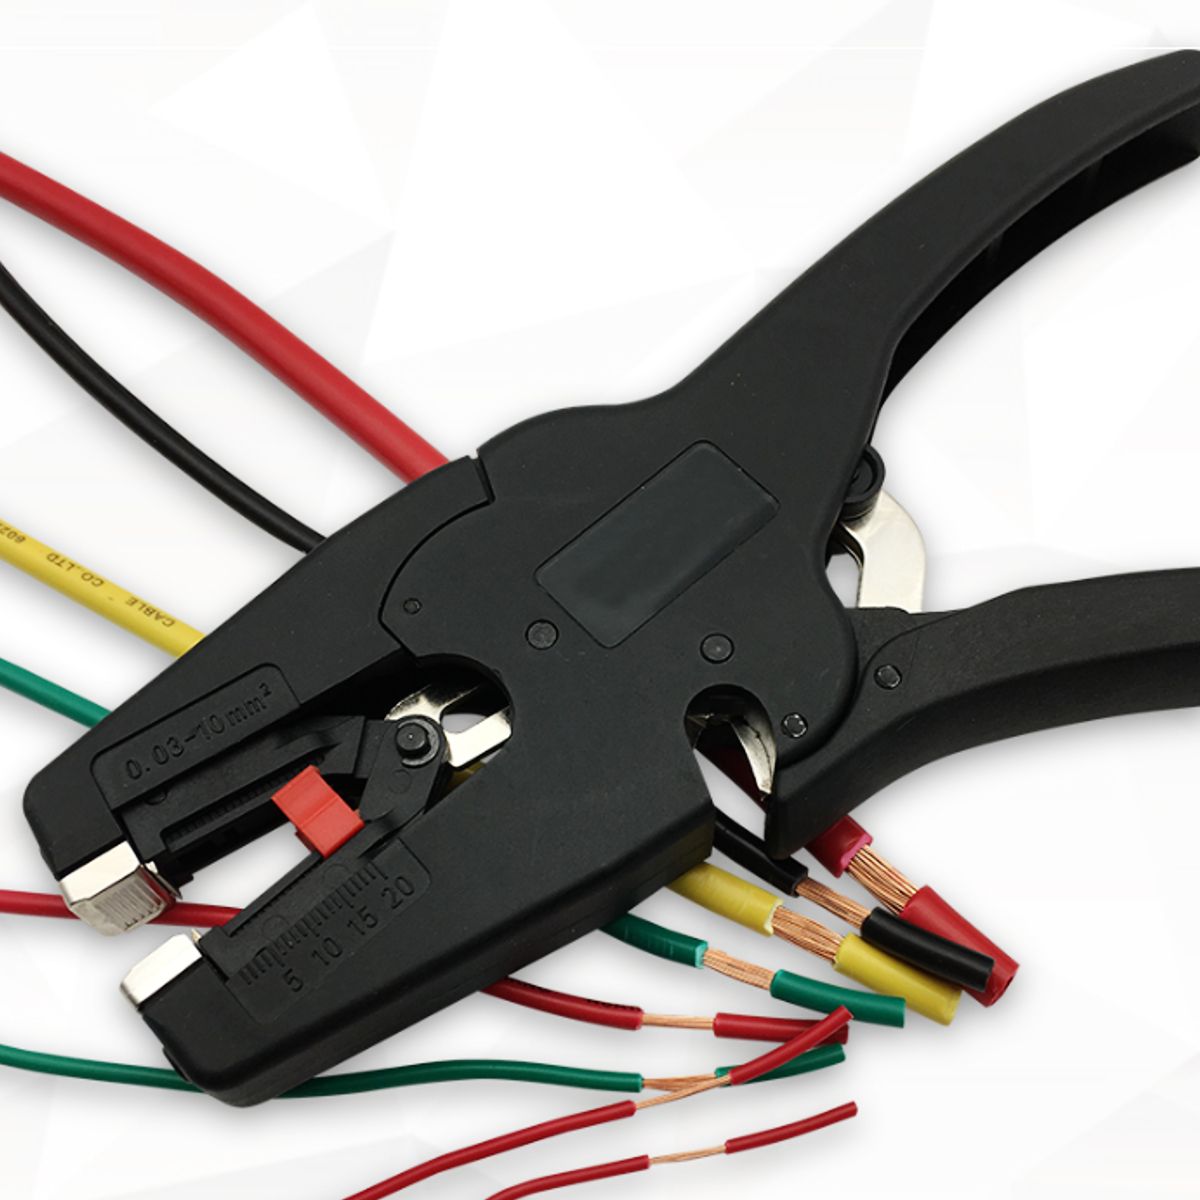 Automatic-Electrical-Wire-Cable-Stripper-Stripping-Plier-Terminal-Crimper-Tool-Cable-Cutter-Crimper-1365591